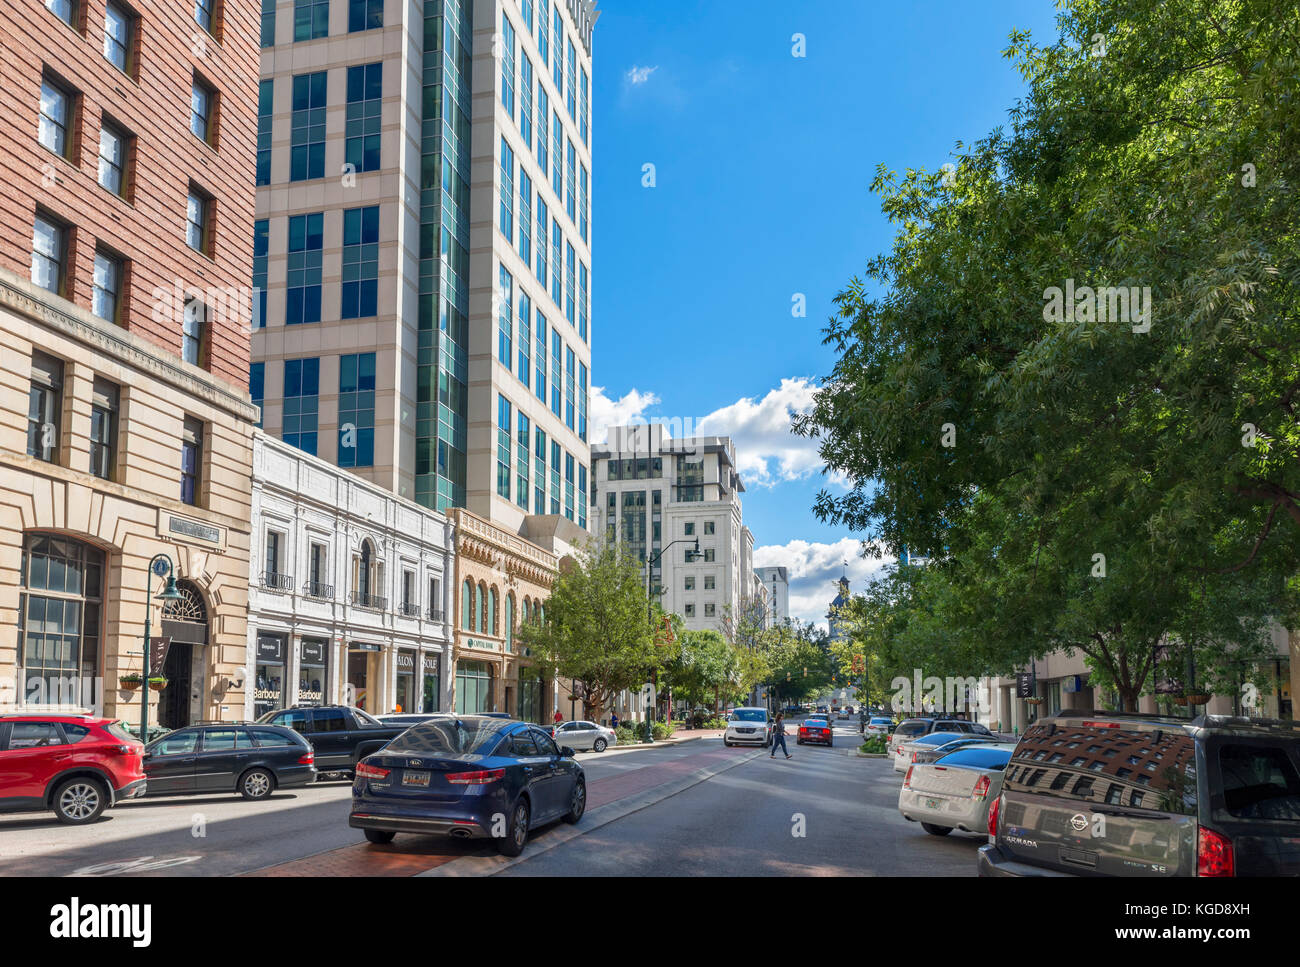 Main Street in downtown Columbia looking towards the State House, South Carolina, USA Stock Photo